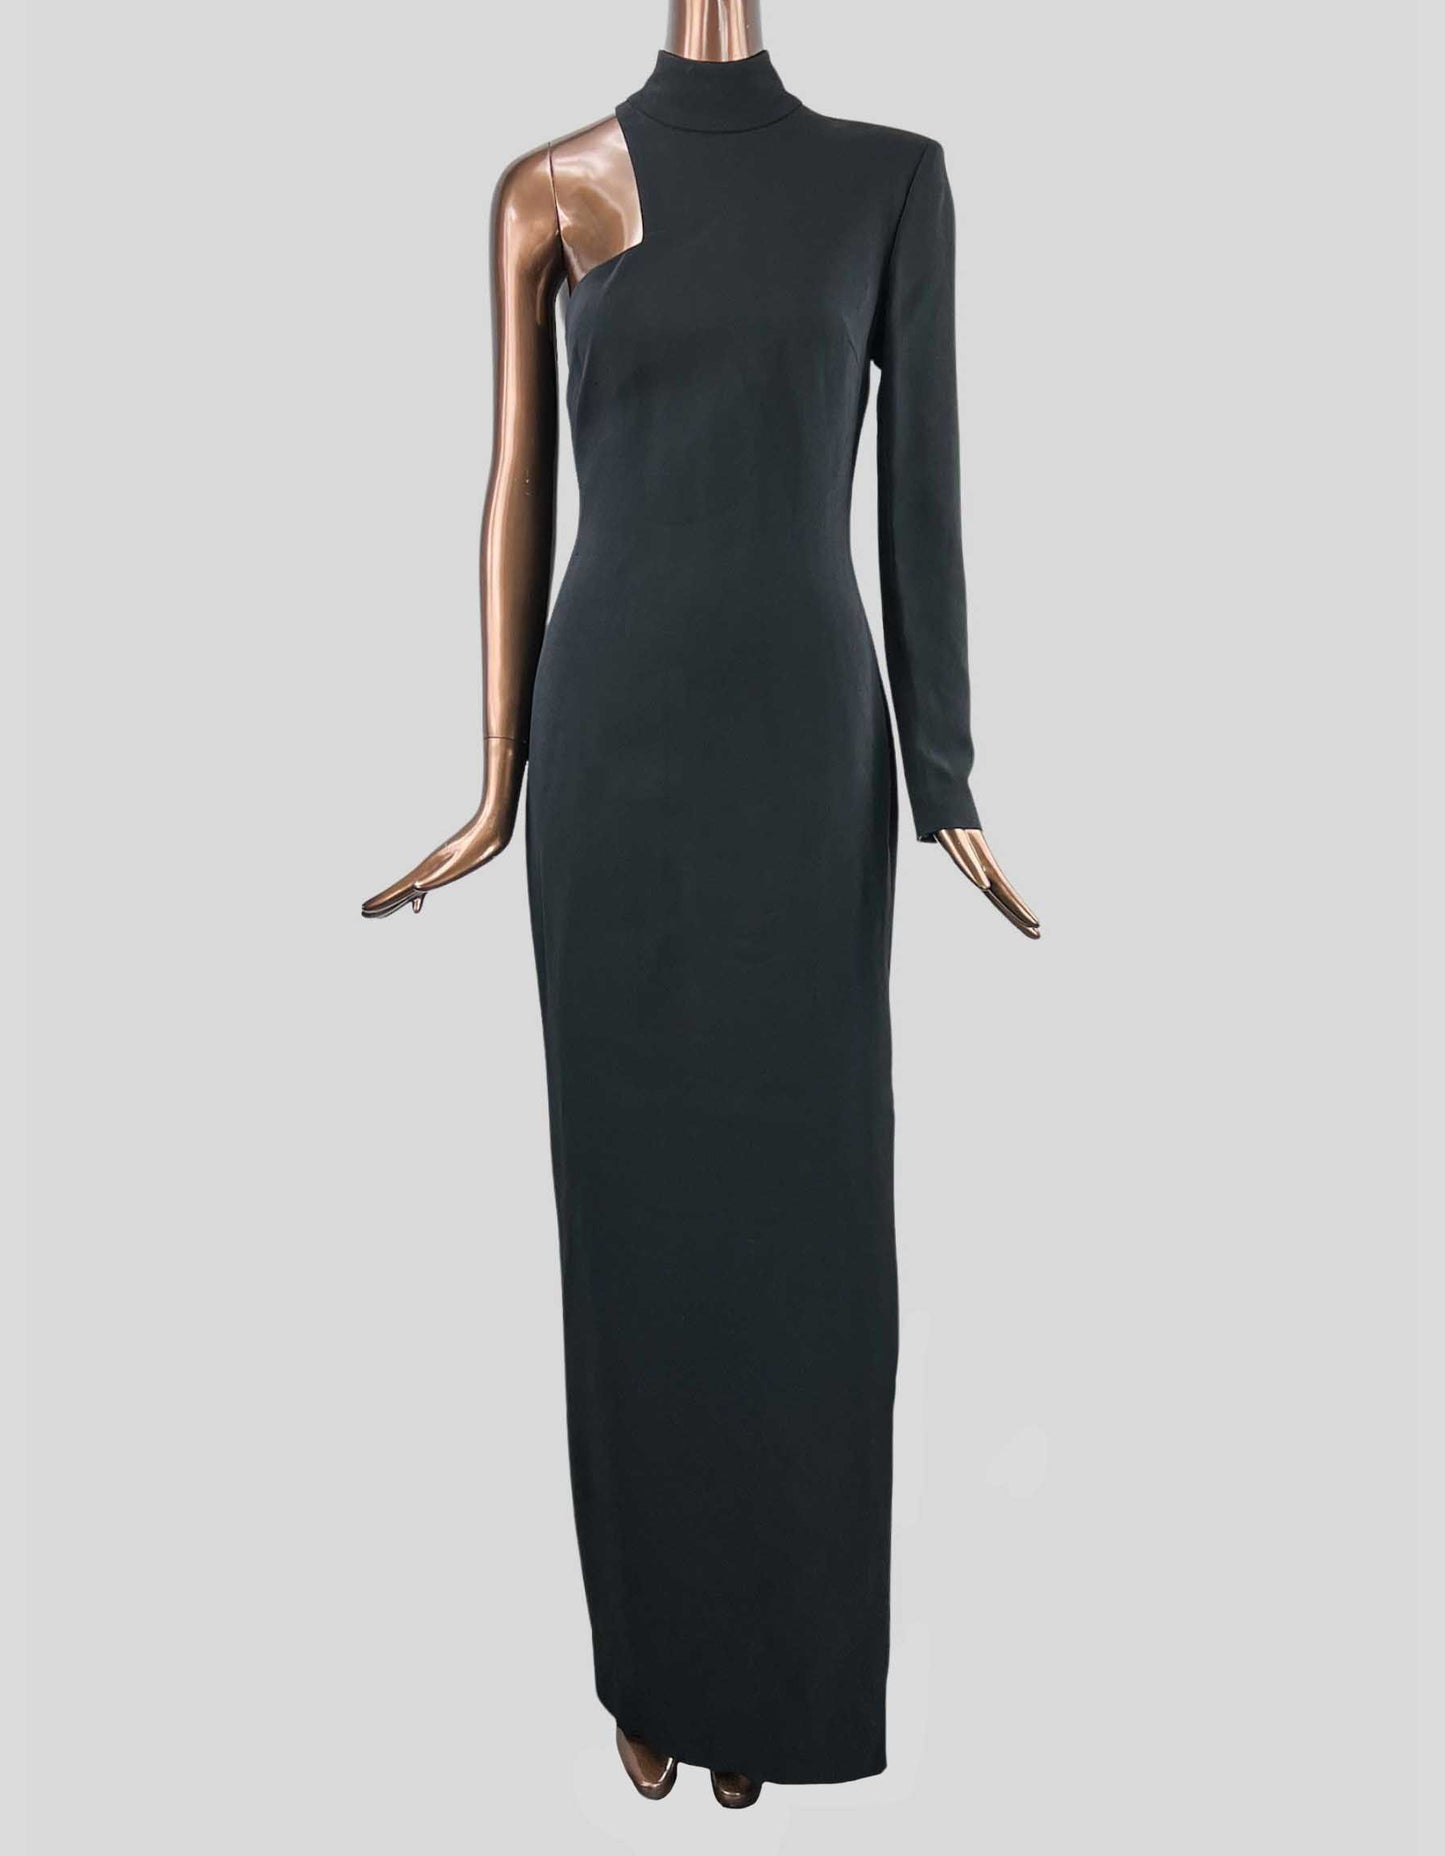 TOM FORD One-Shoulder with Side Slit Gown - 38 IT | 2 US | Small